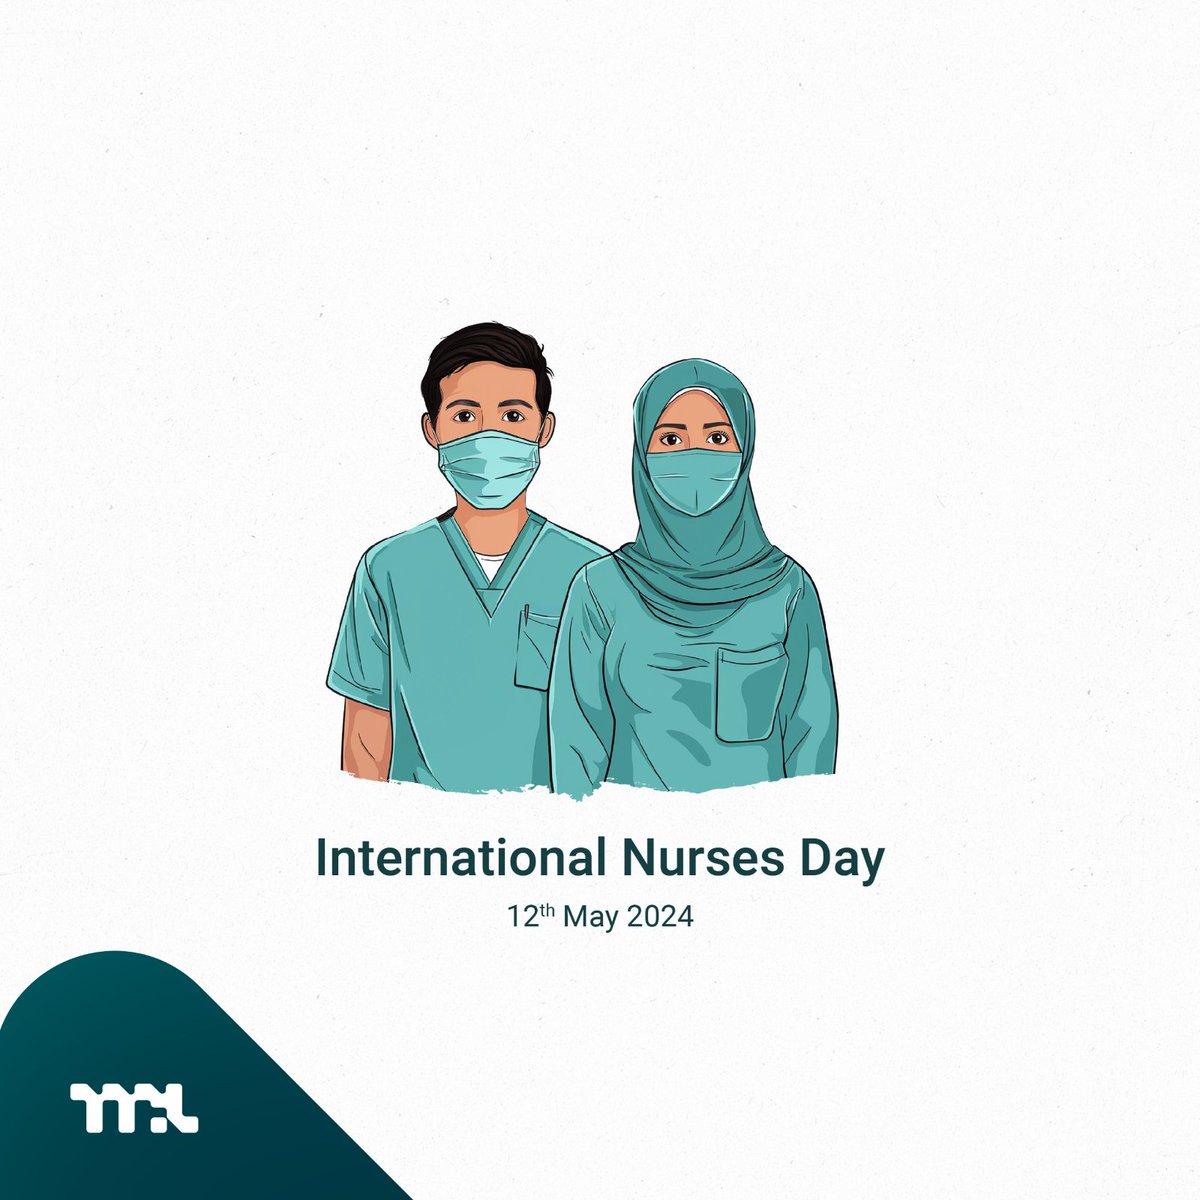 Happy Nurses Day to our everyday heroes! 💙